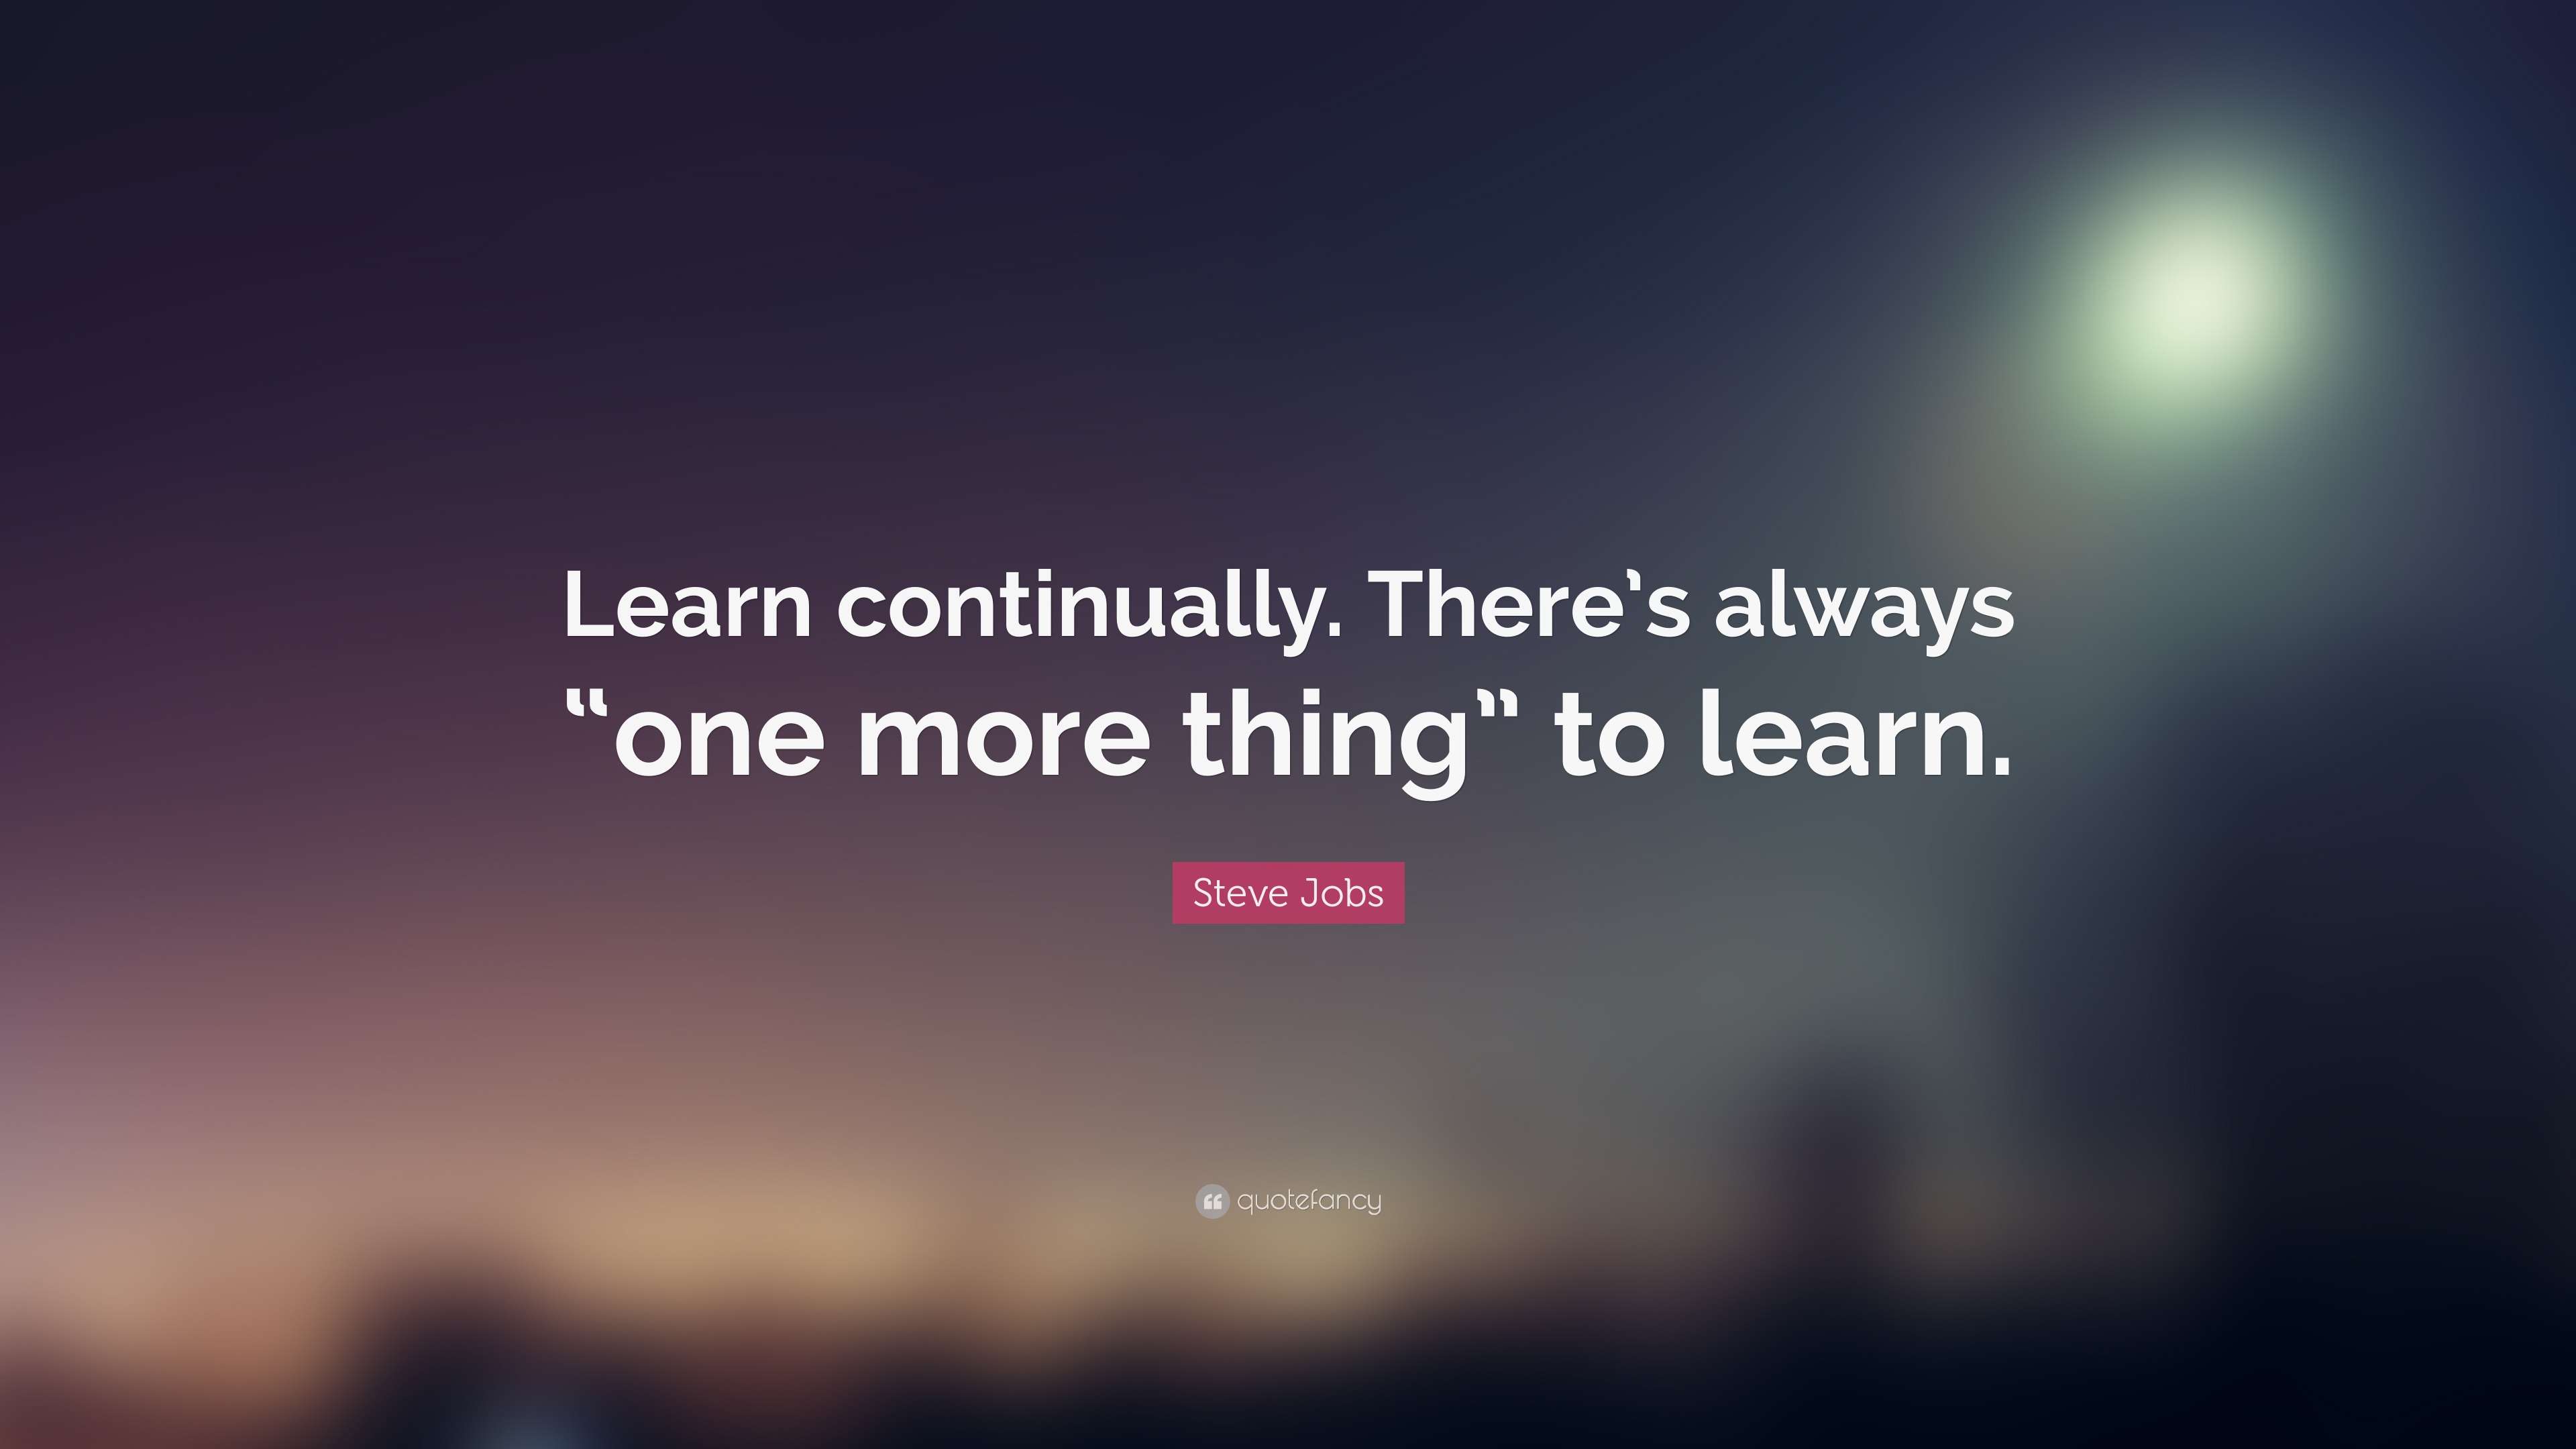 Steve Jobs Quote: “Learn continually. There’s always “one more thing